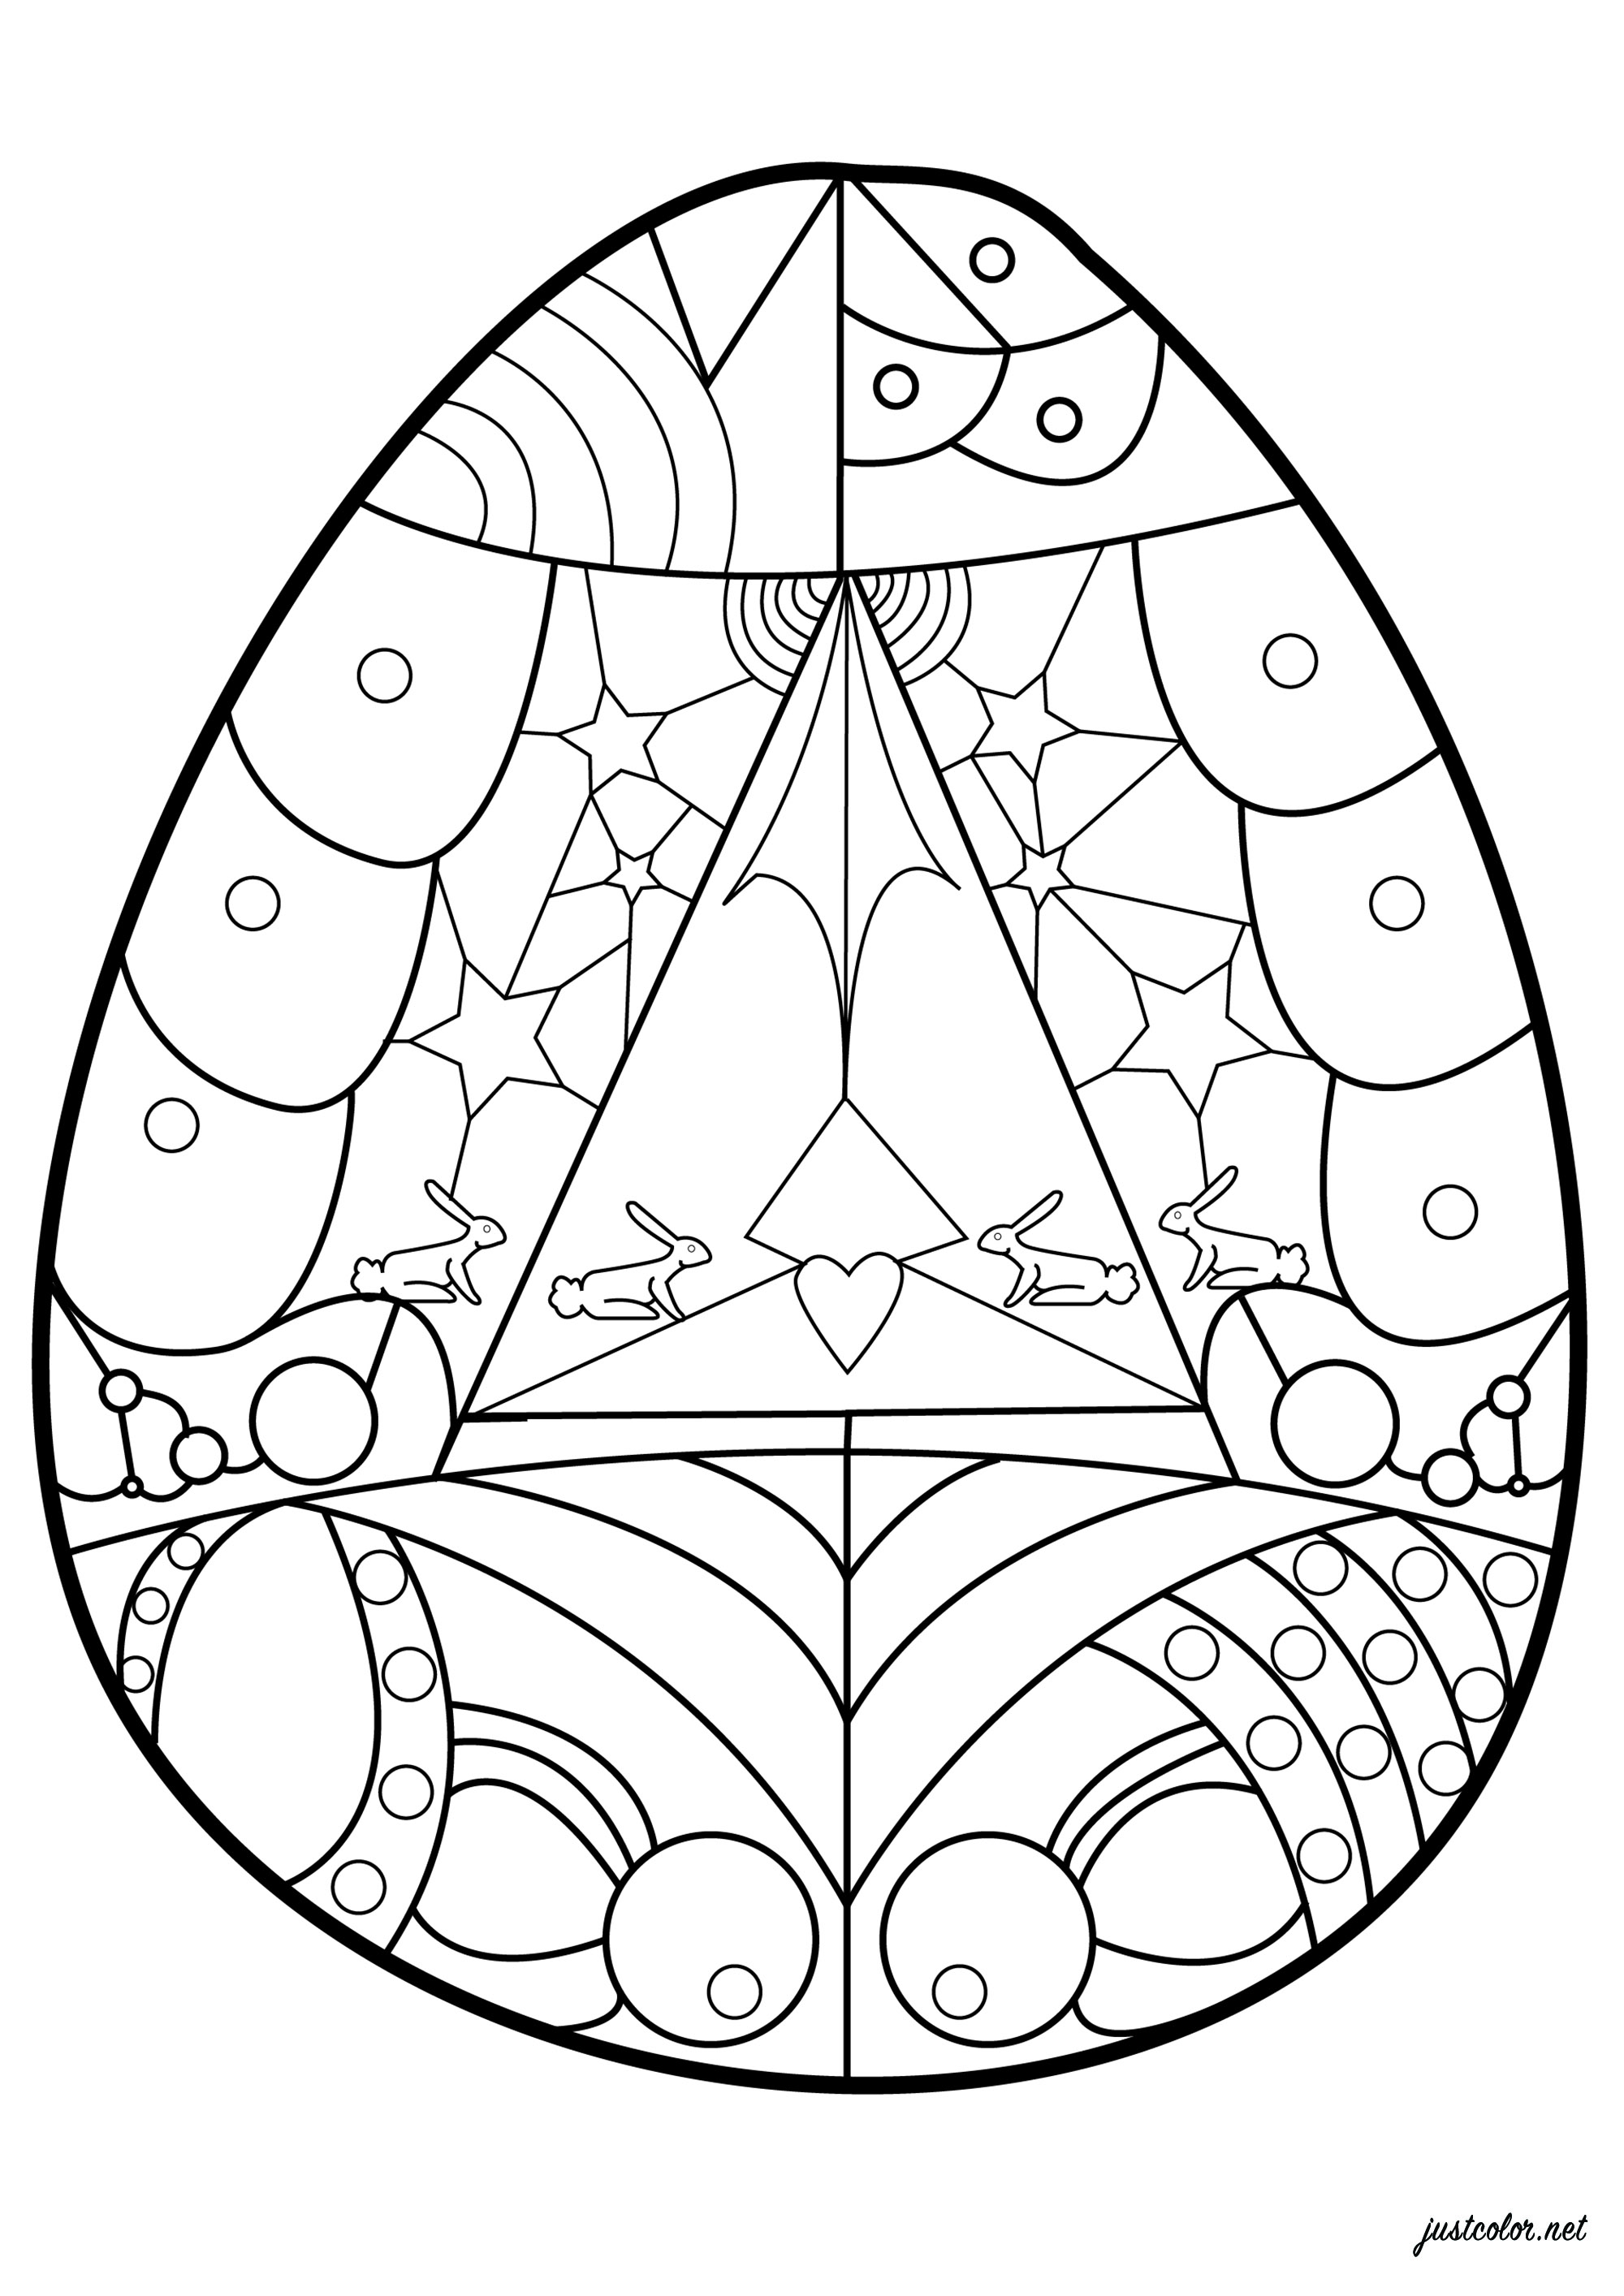 Easter egg coloring page with geometric patterns, Artist : Esteban